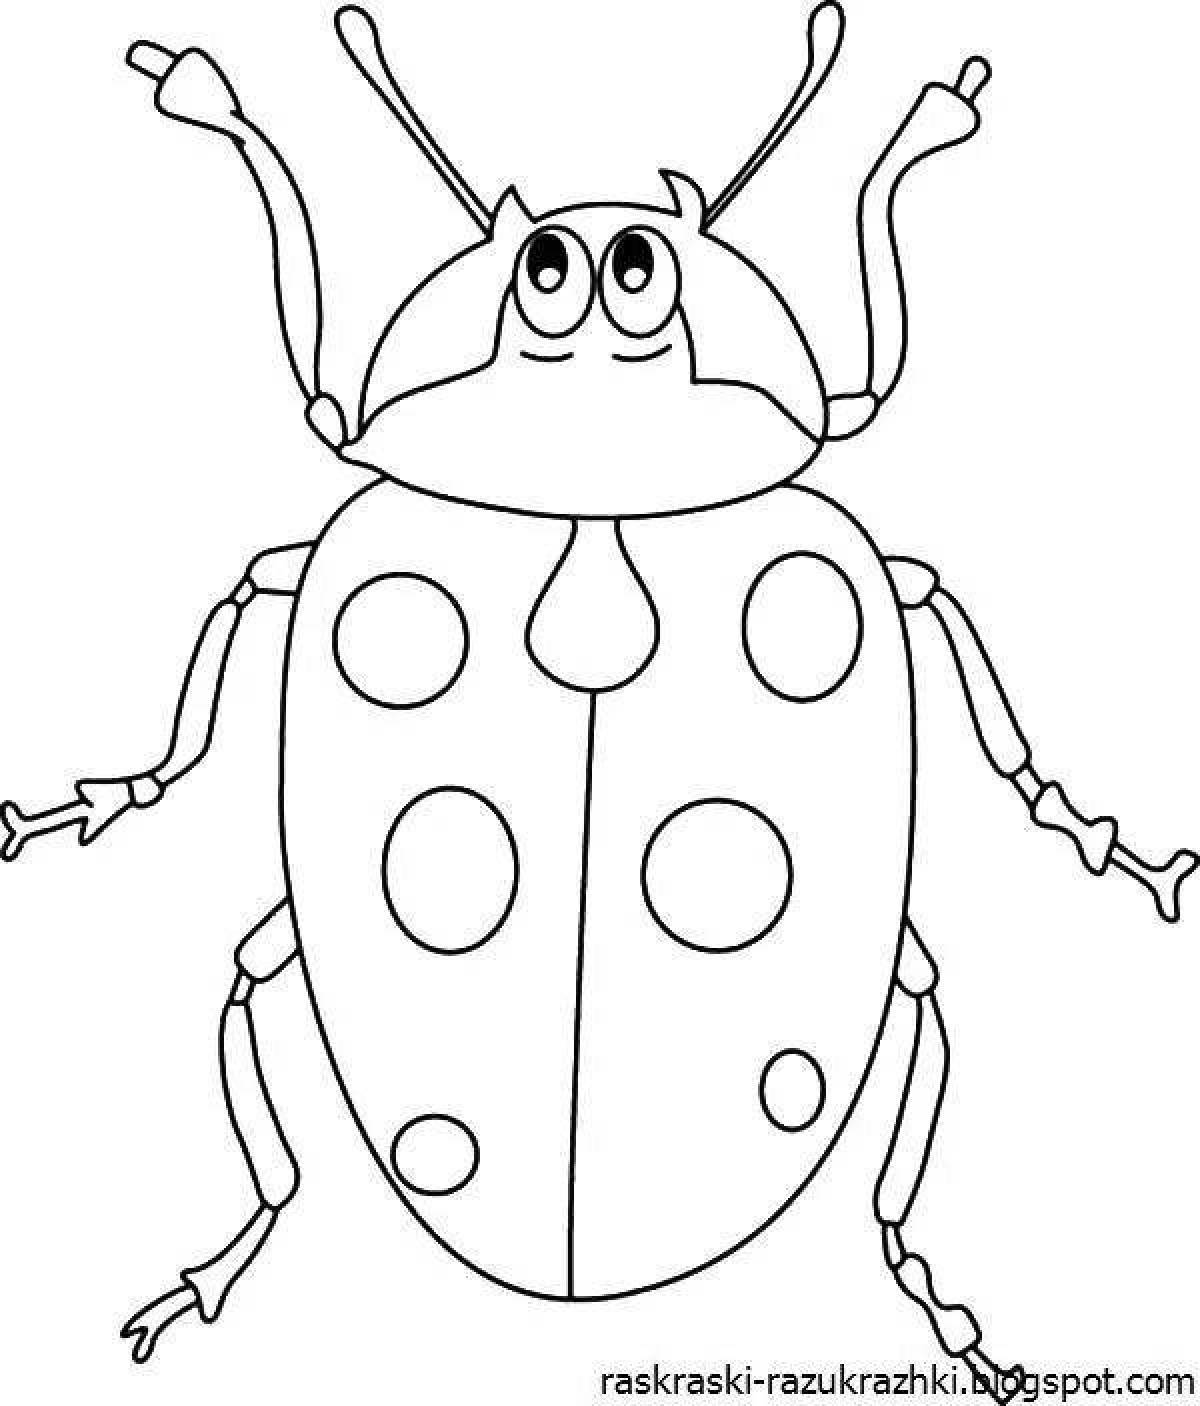 Colourful beetle coloring book for kids